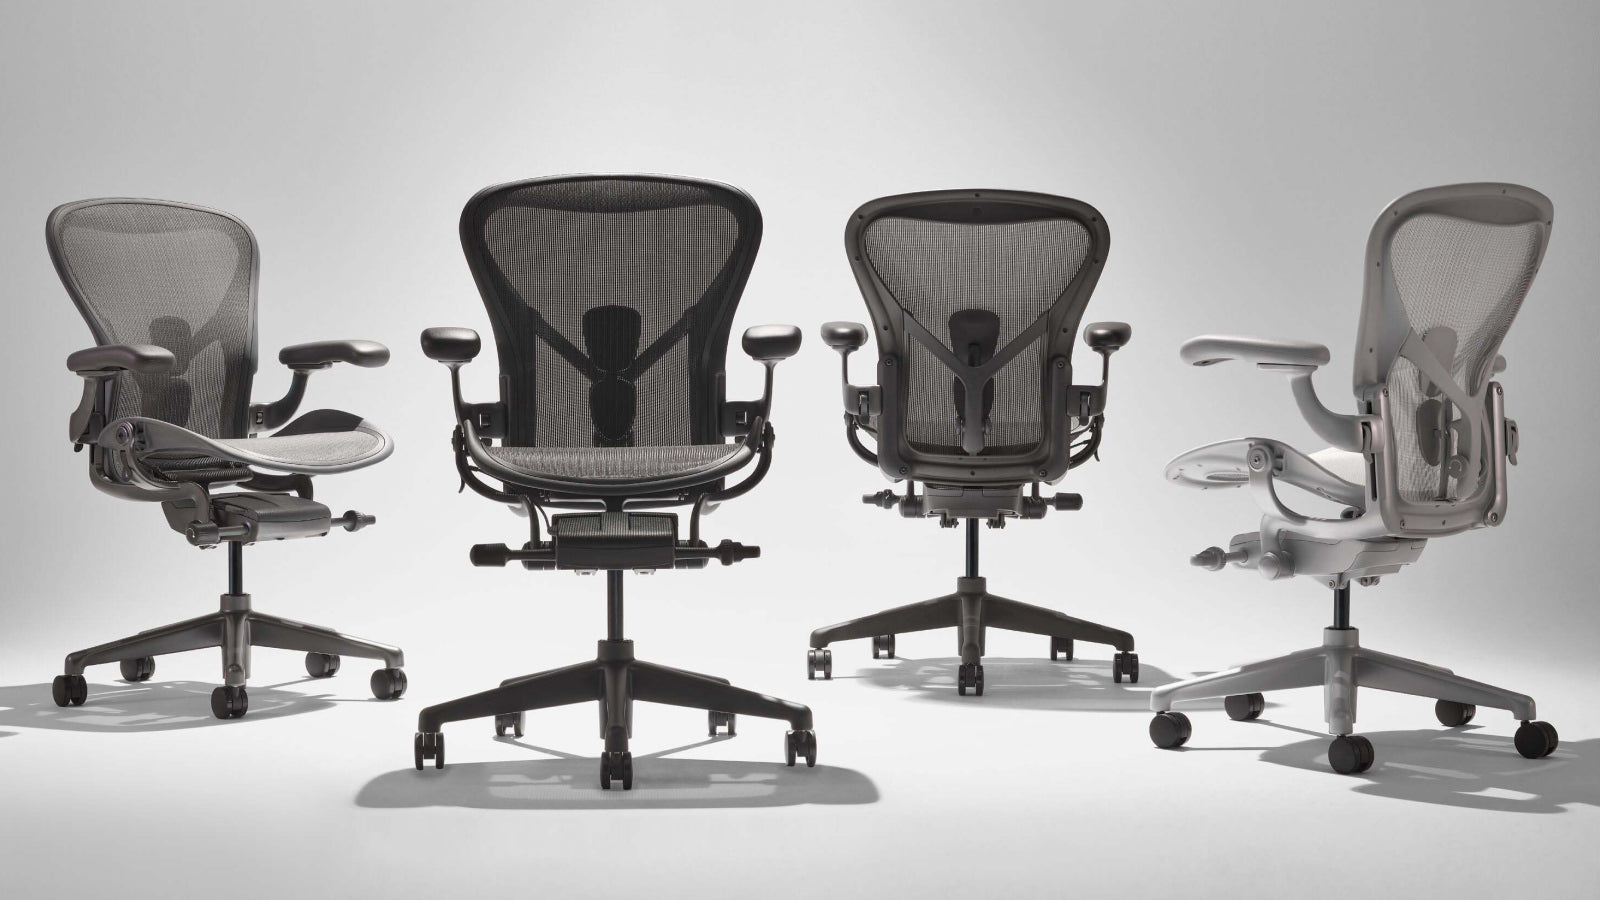 The launch colours of the Remastered Herman Miller Aeron - Carbon, Graphite and Mineral